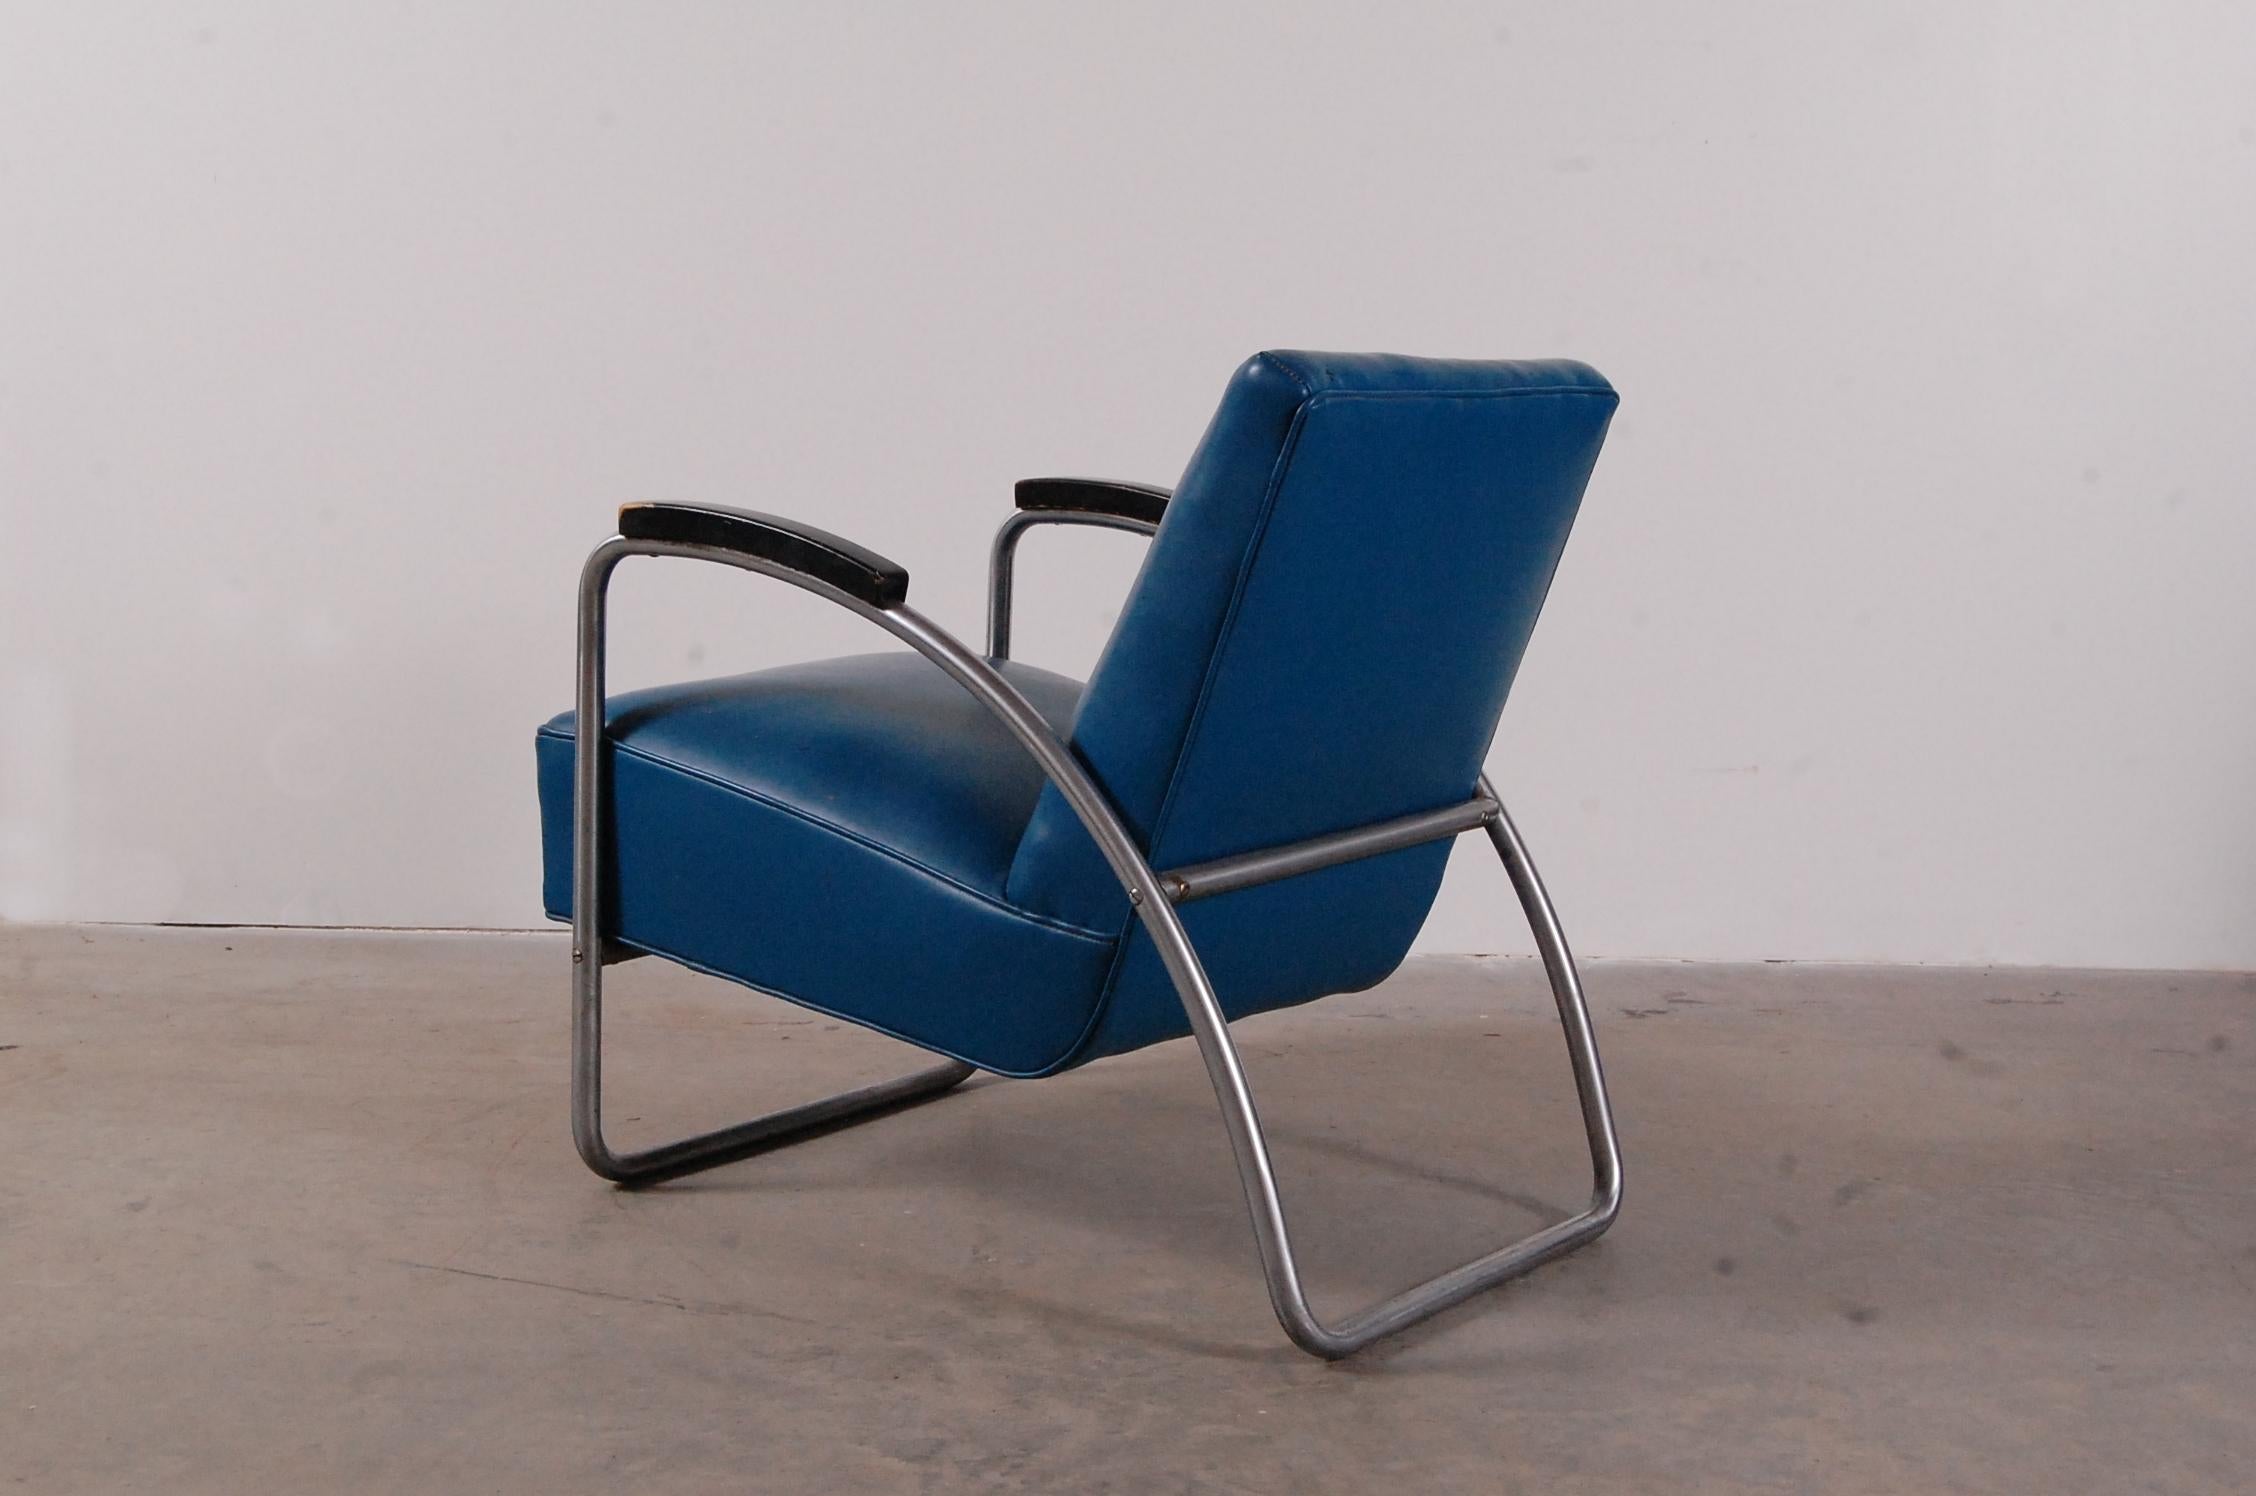 Plated Thonet Lounge Chair from the PSFS building in Philadelphia